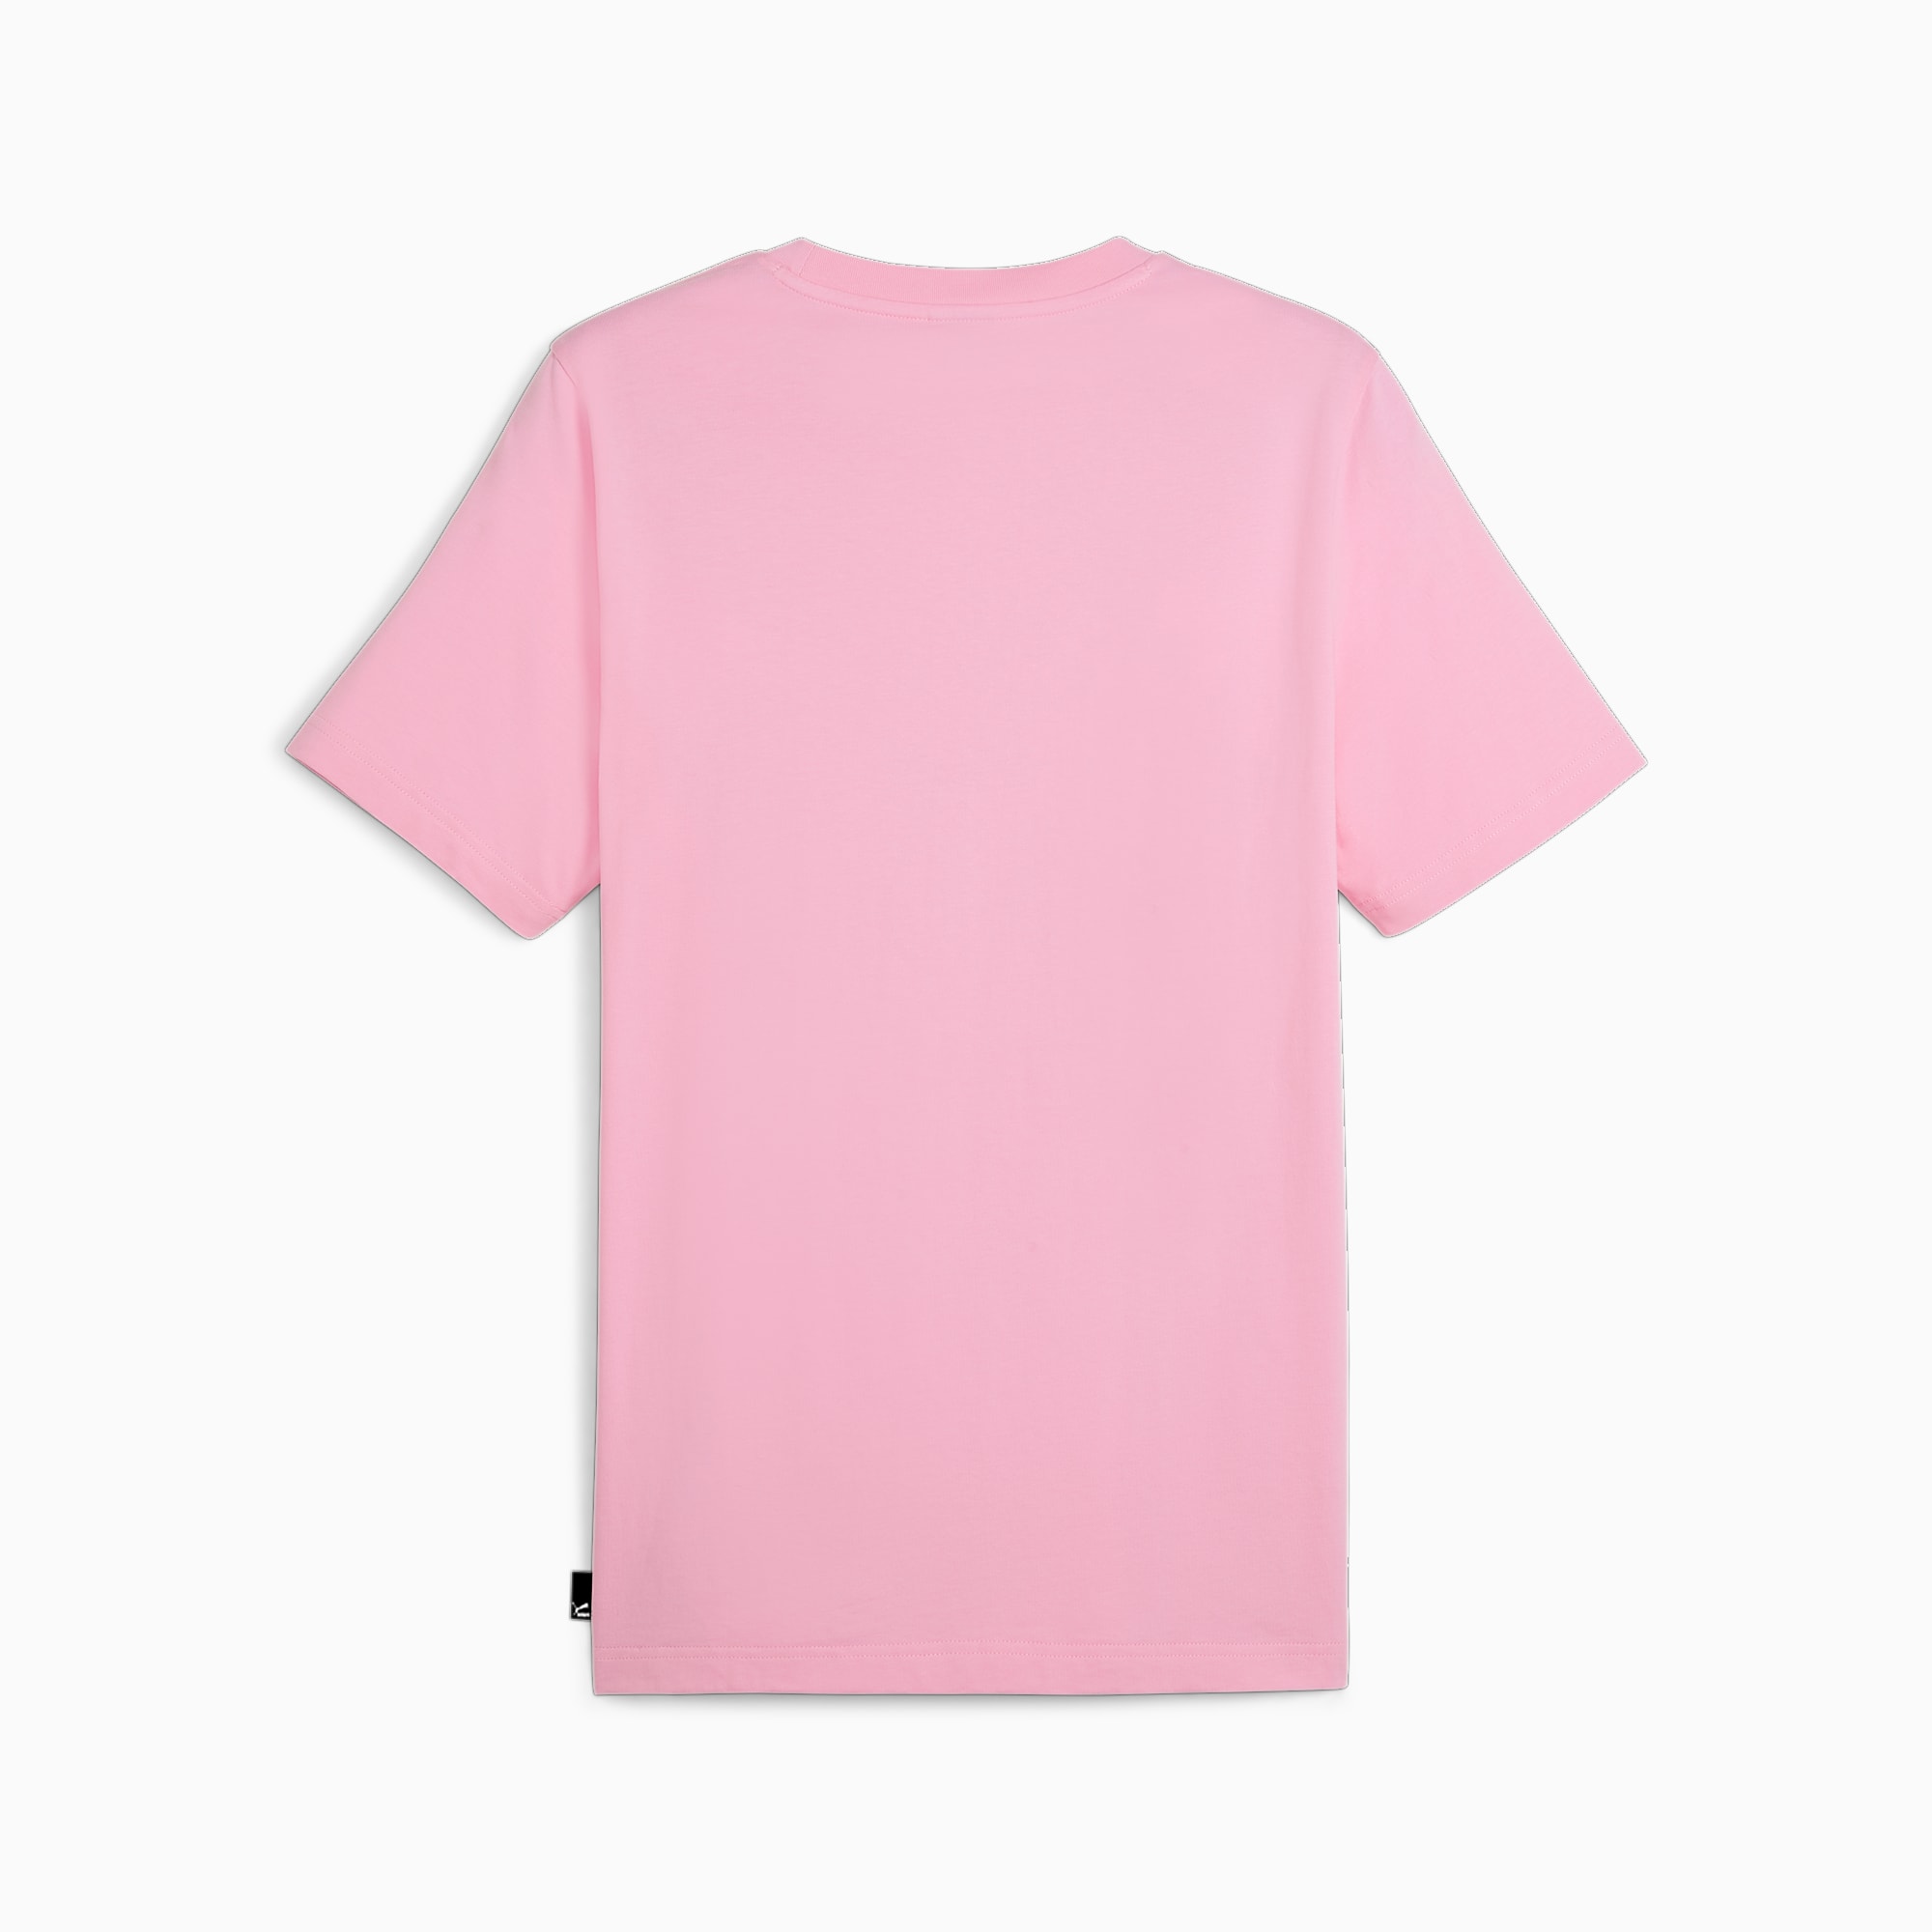 Graphics PUMA Gelateria Men's T-Shirt, Pink Lilac, Size XS, Clothing